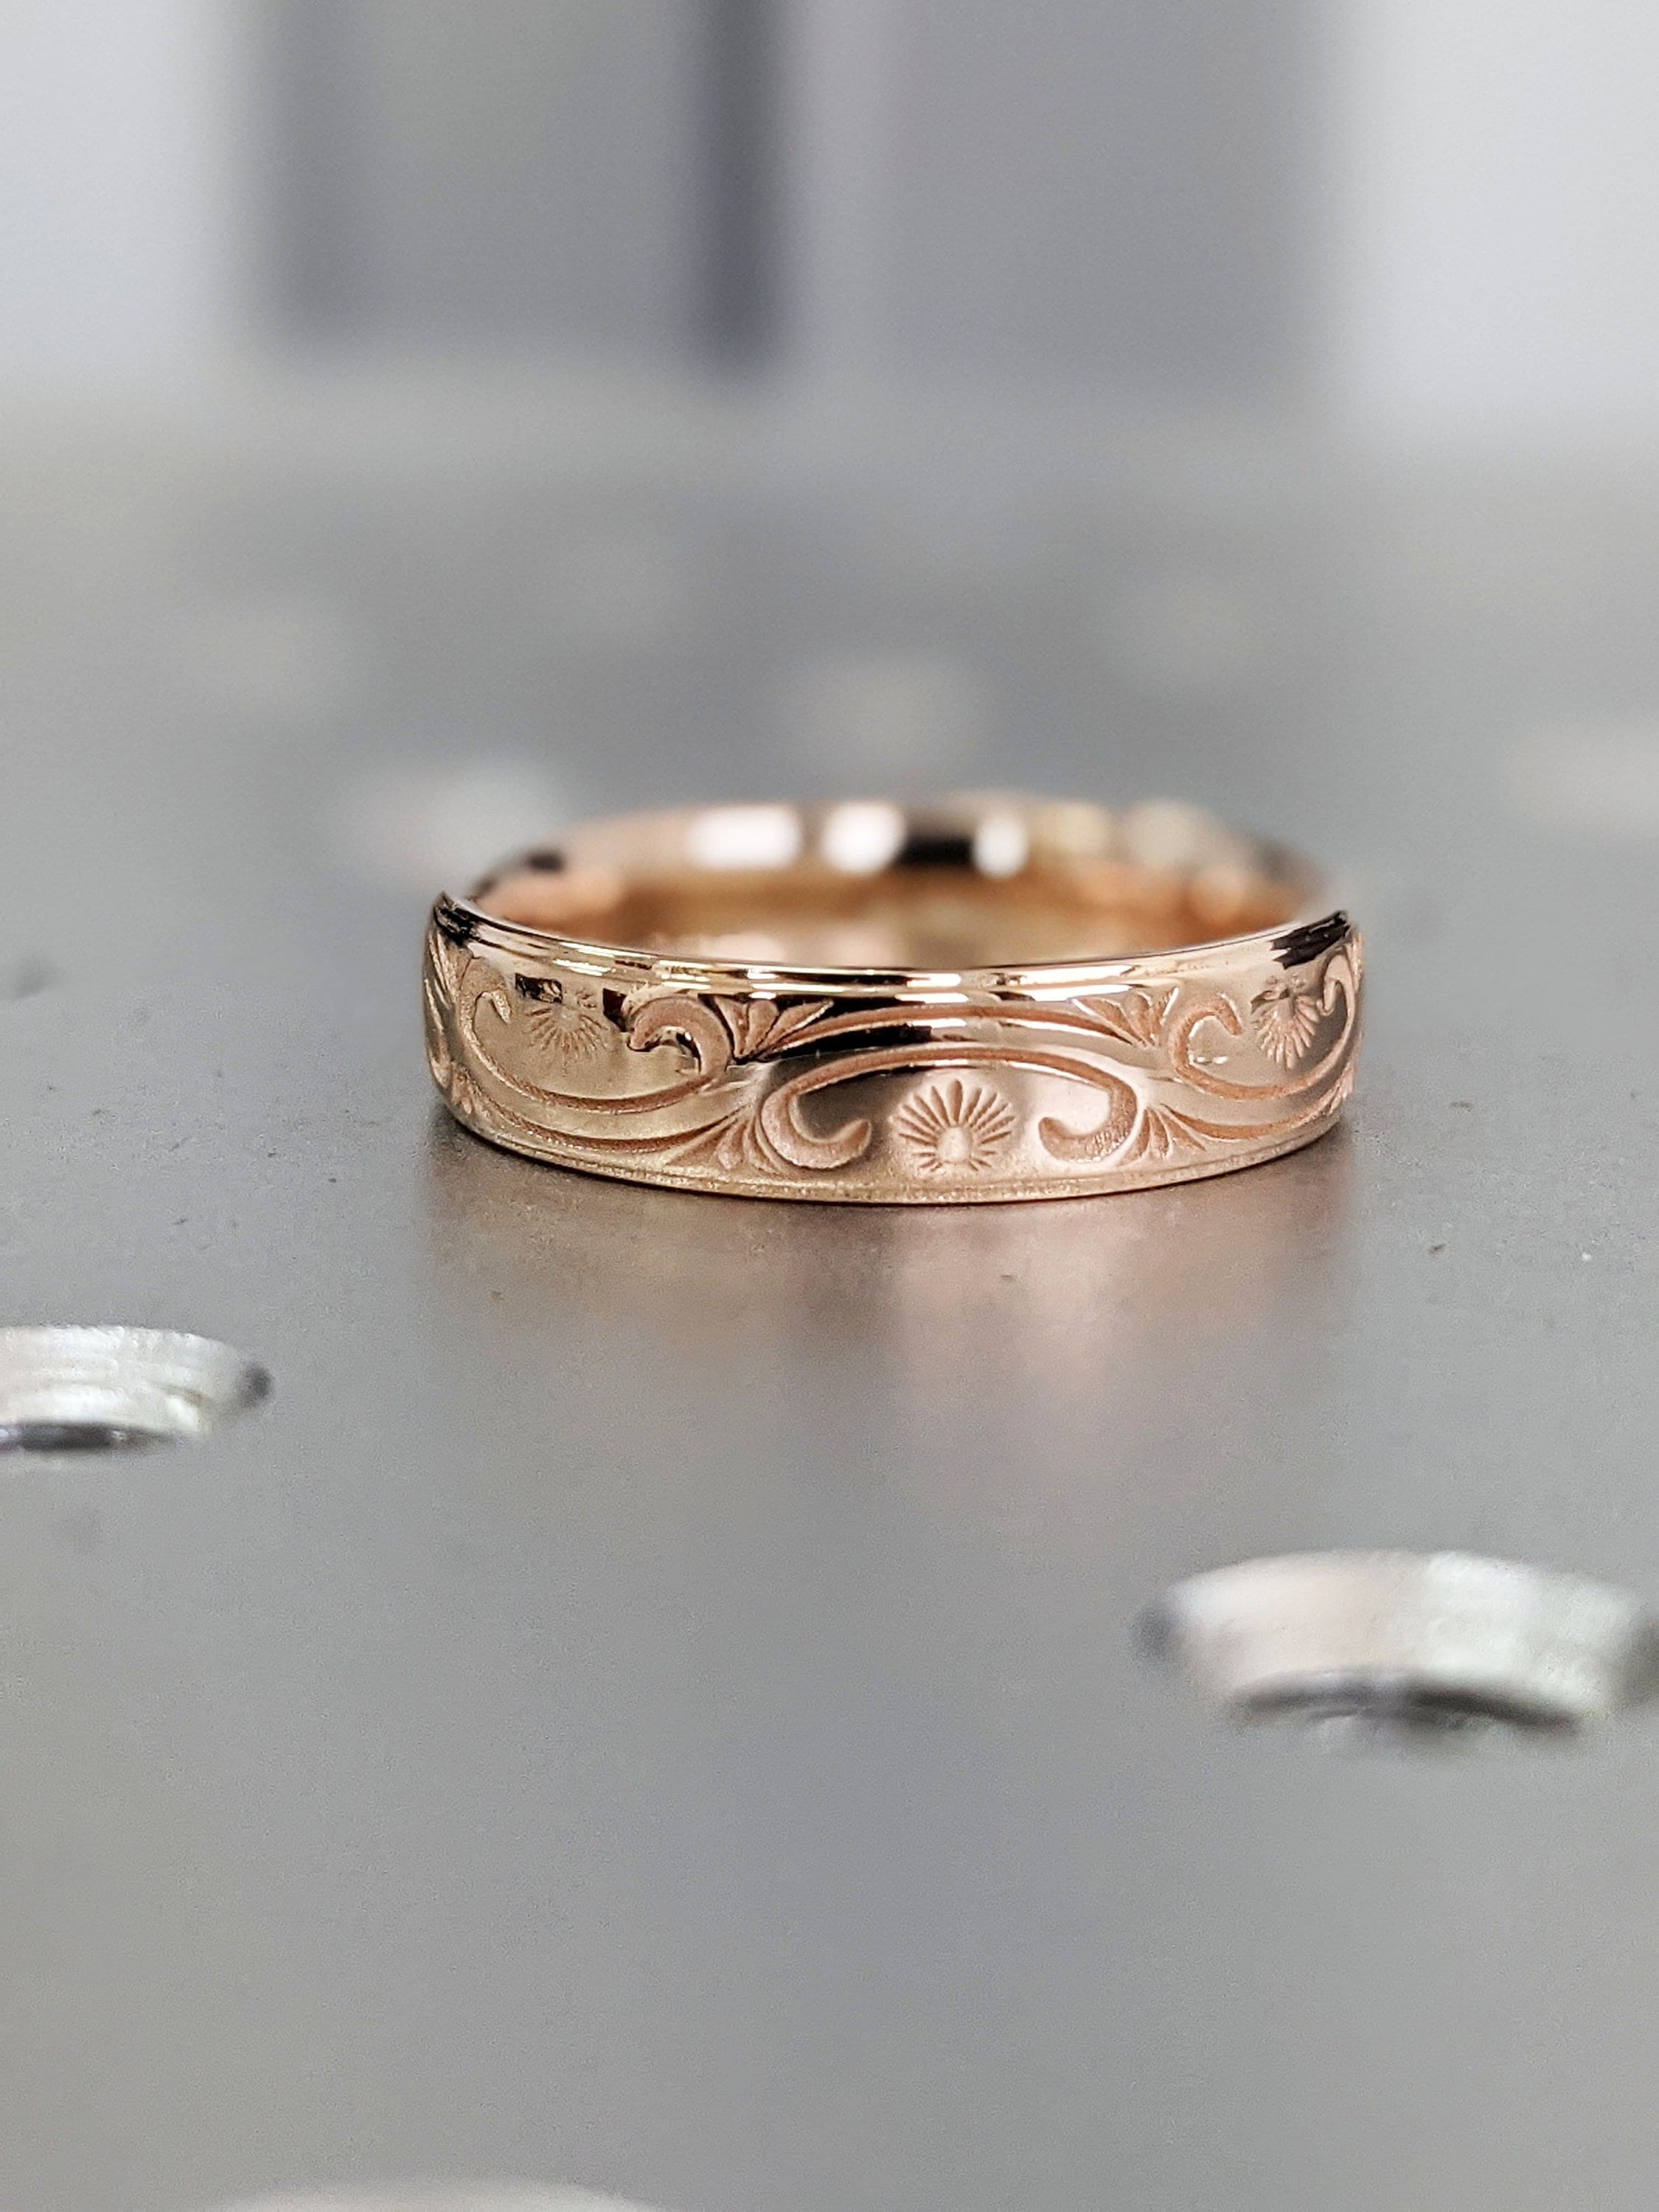 6mm Wedding Band 18K Rose Gold Vermeil 925 Sterling Silver Hand Forged Hammered Mens Women Unisex Flat Pipe Cut Thick Handmade Ring FREE Engraving 